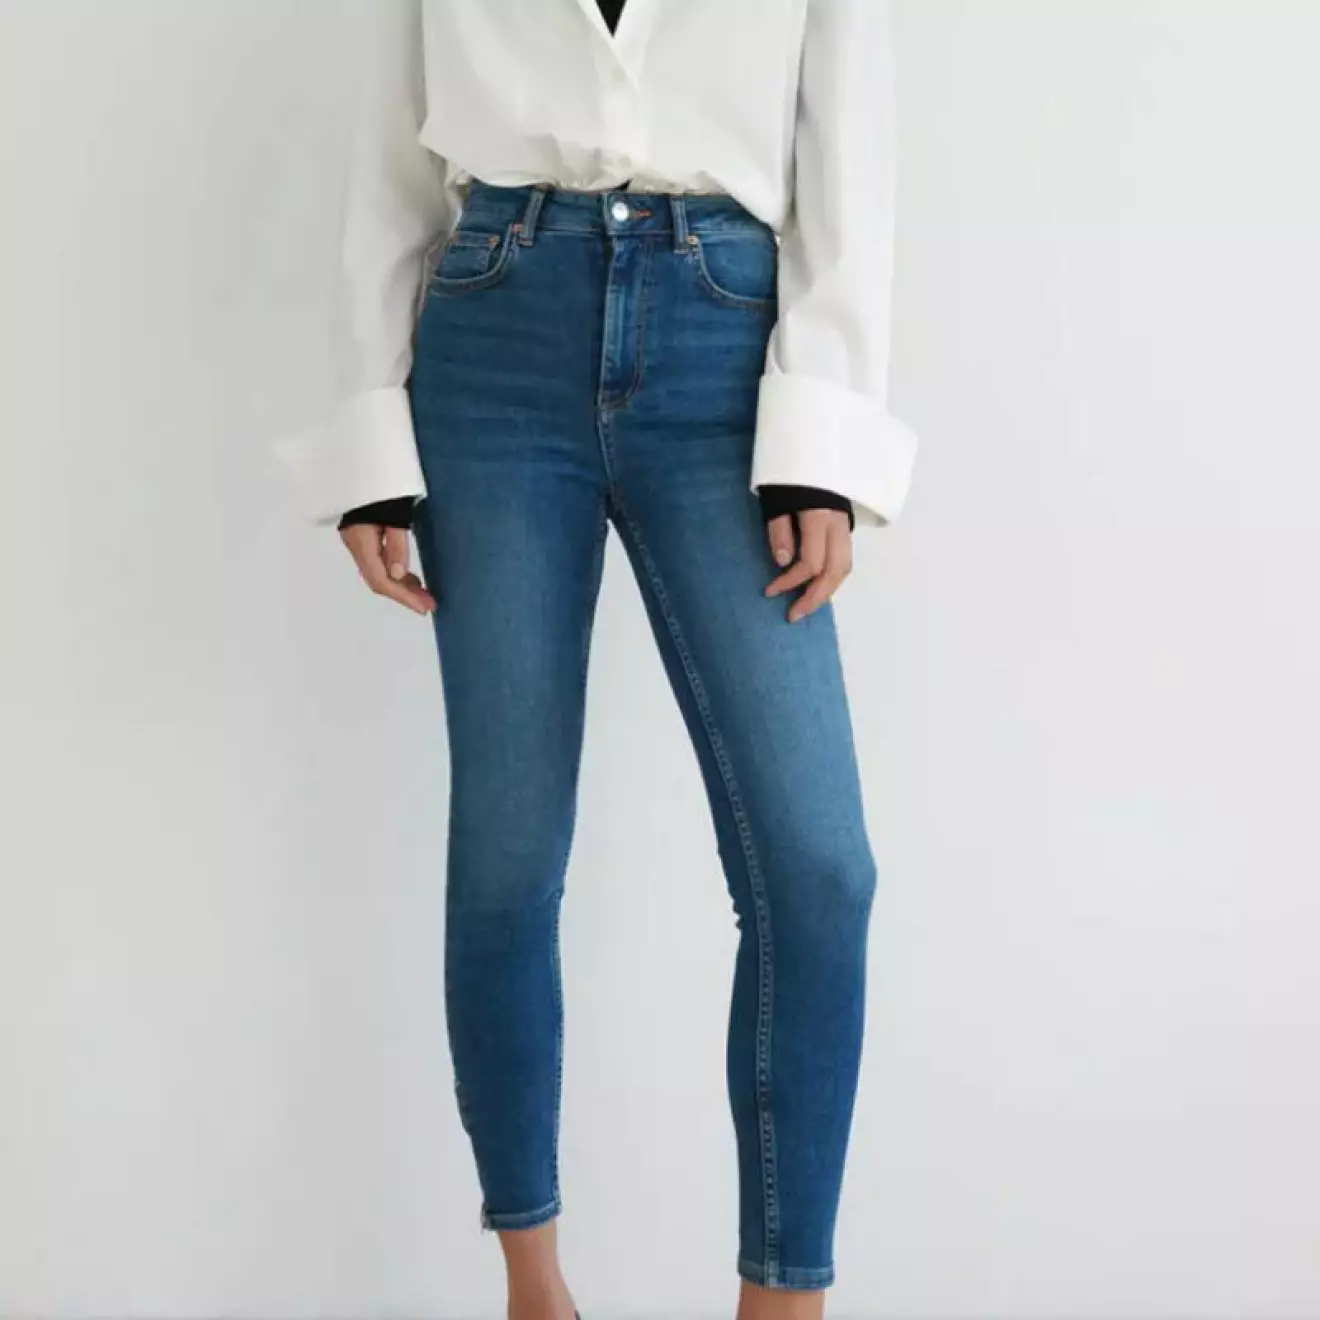 Jeans gina tricot